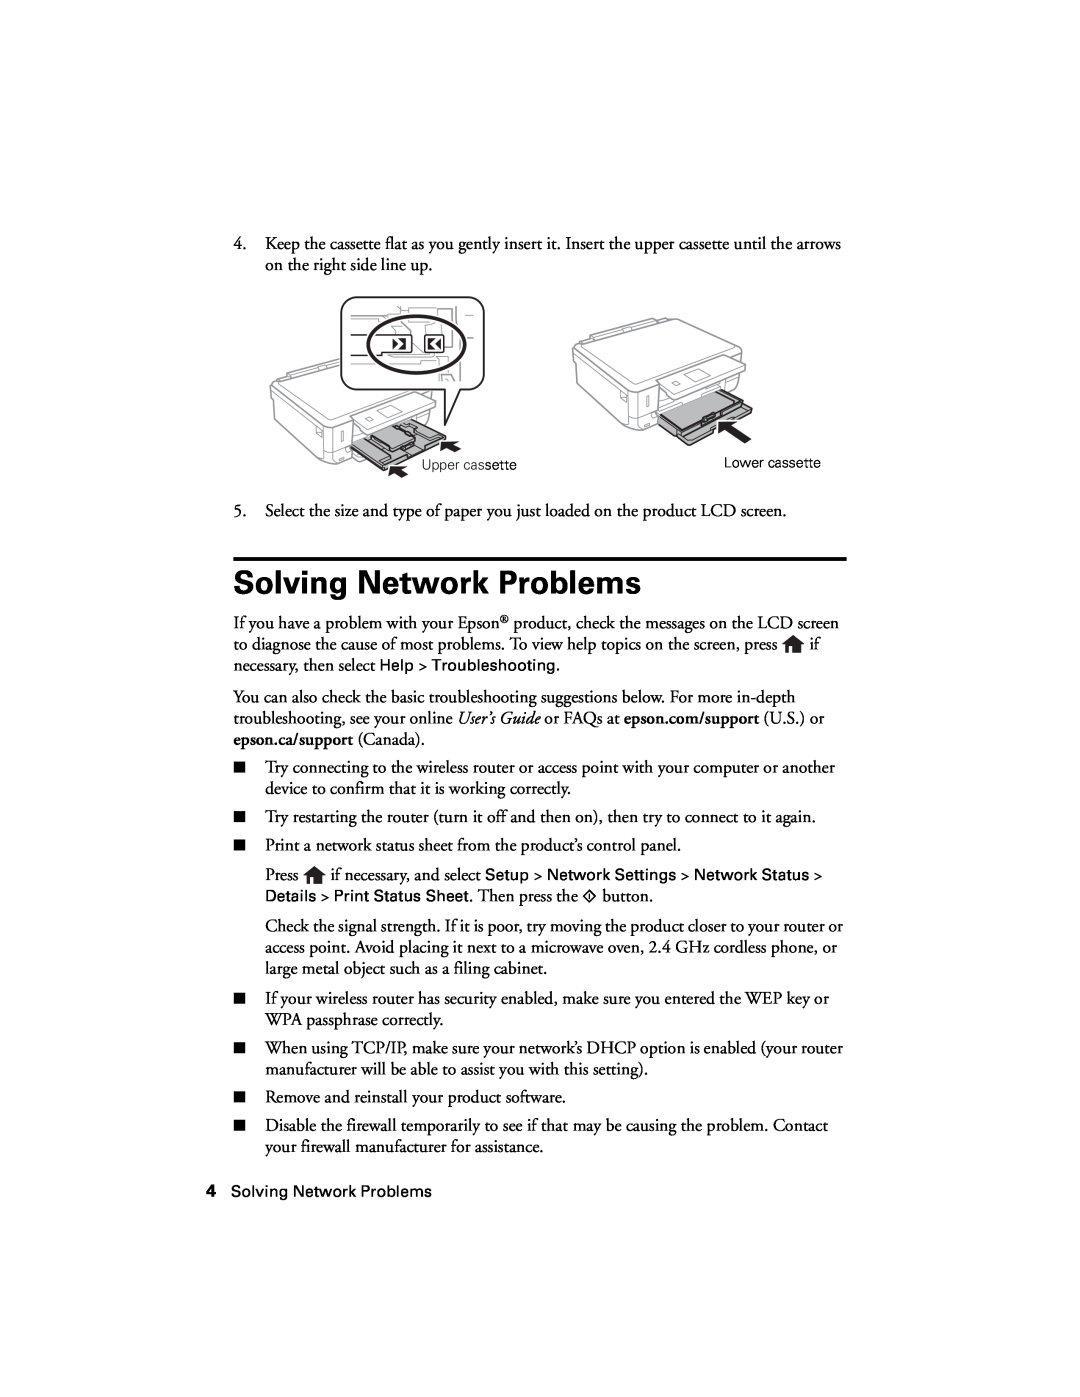 Epson XP-620 manual Solving Network Problems 